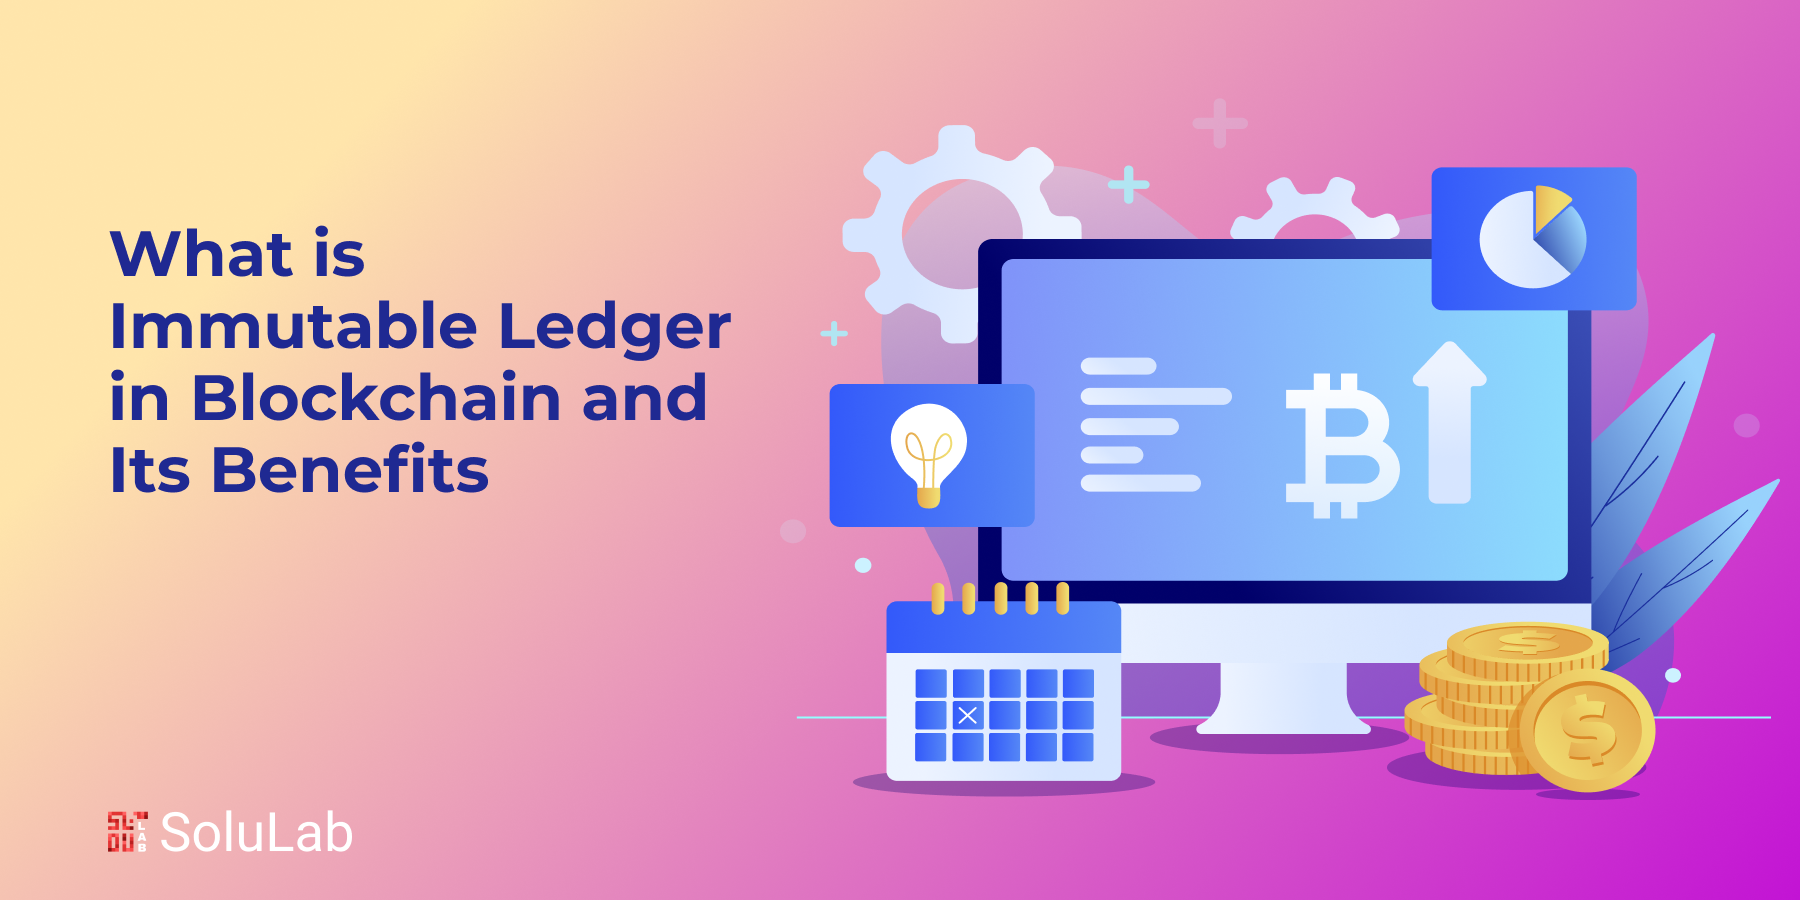 What is Immutable Ledger in Blockchain and Its Benefits